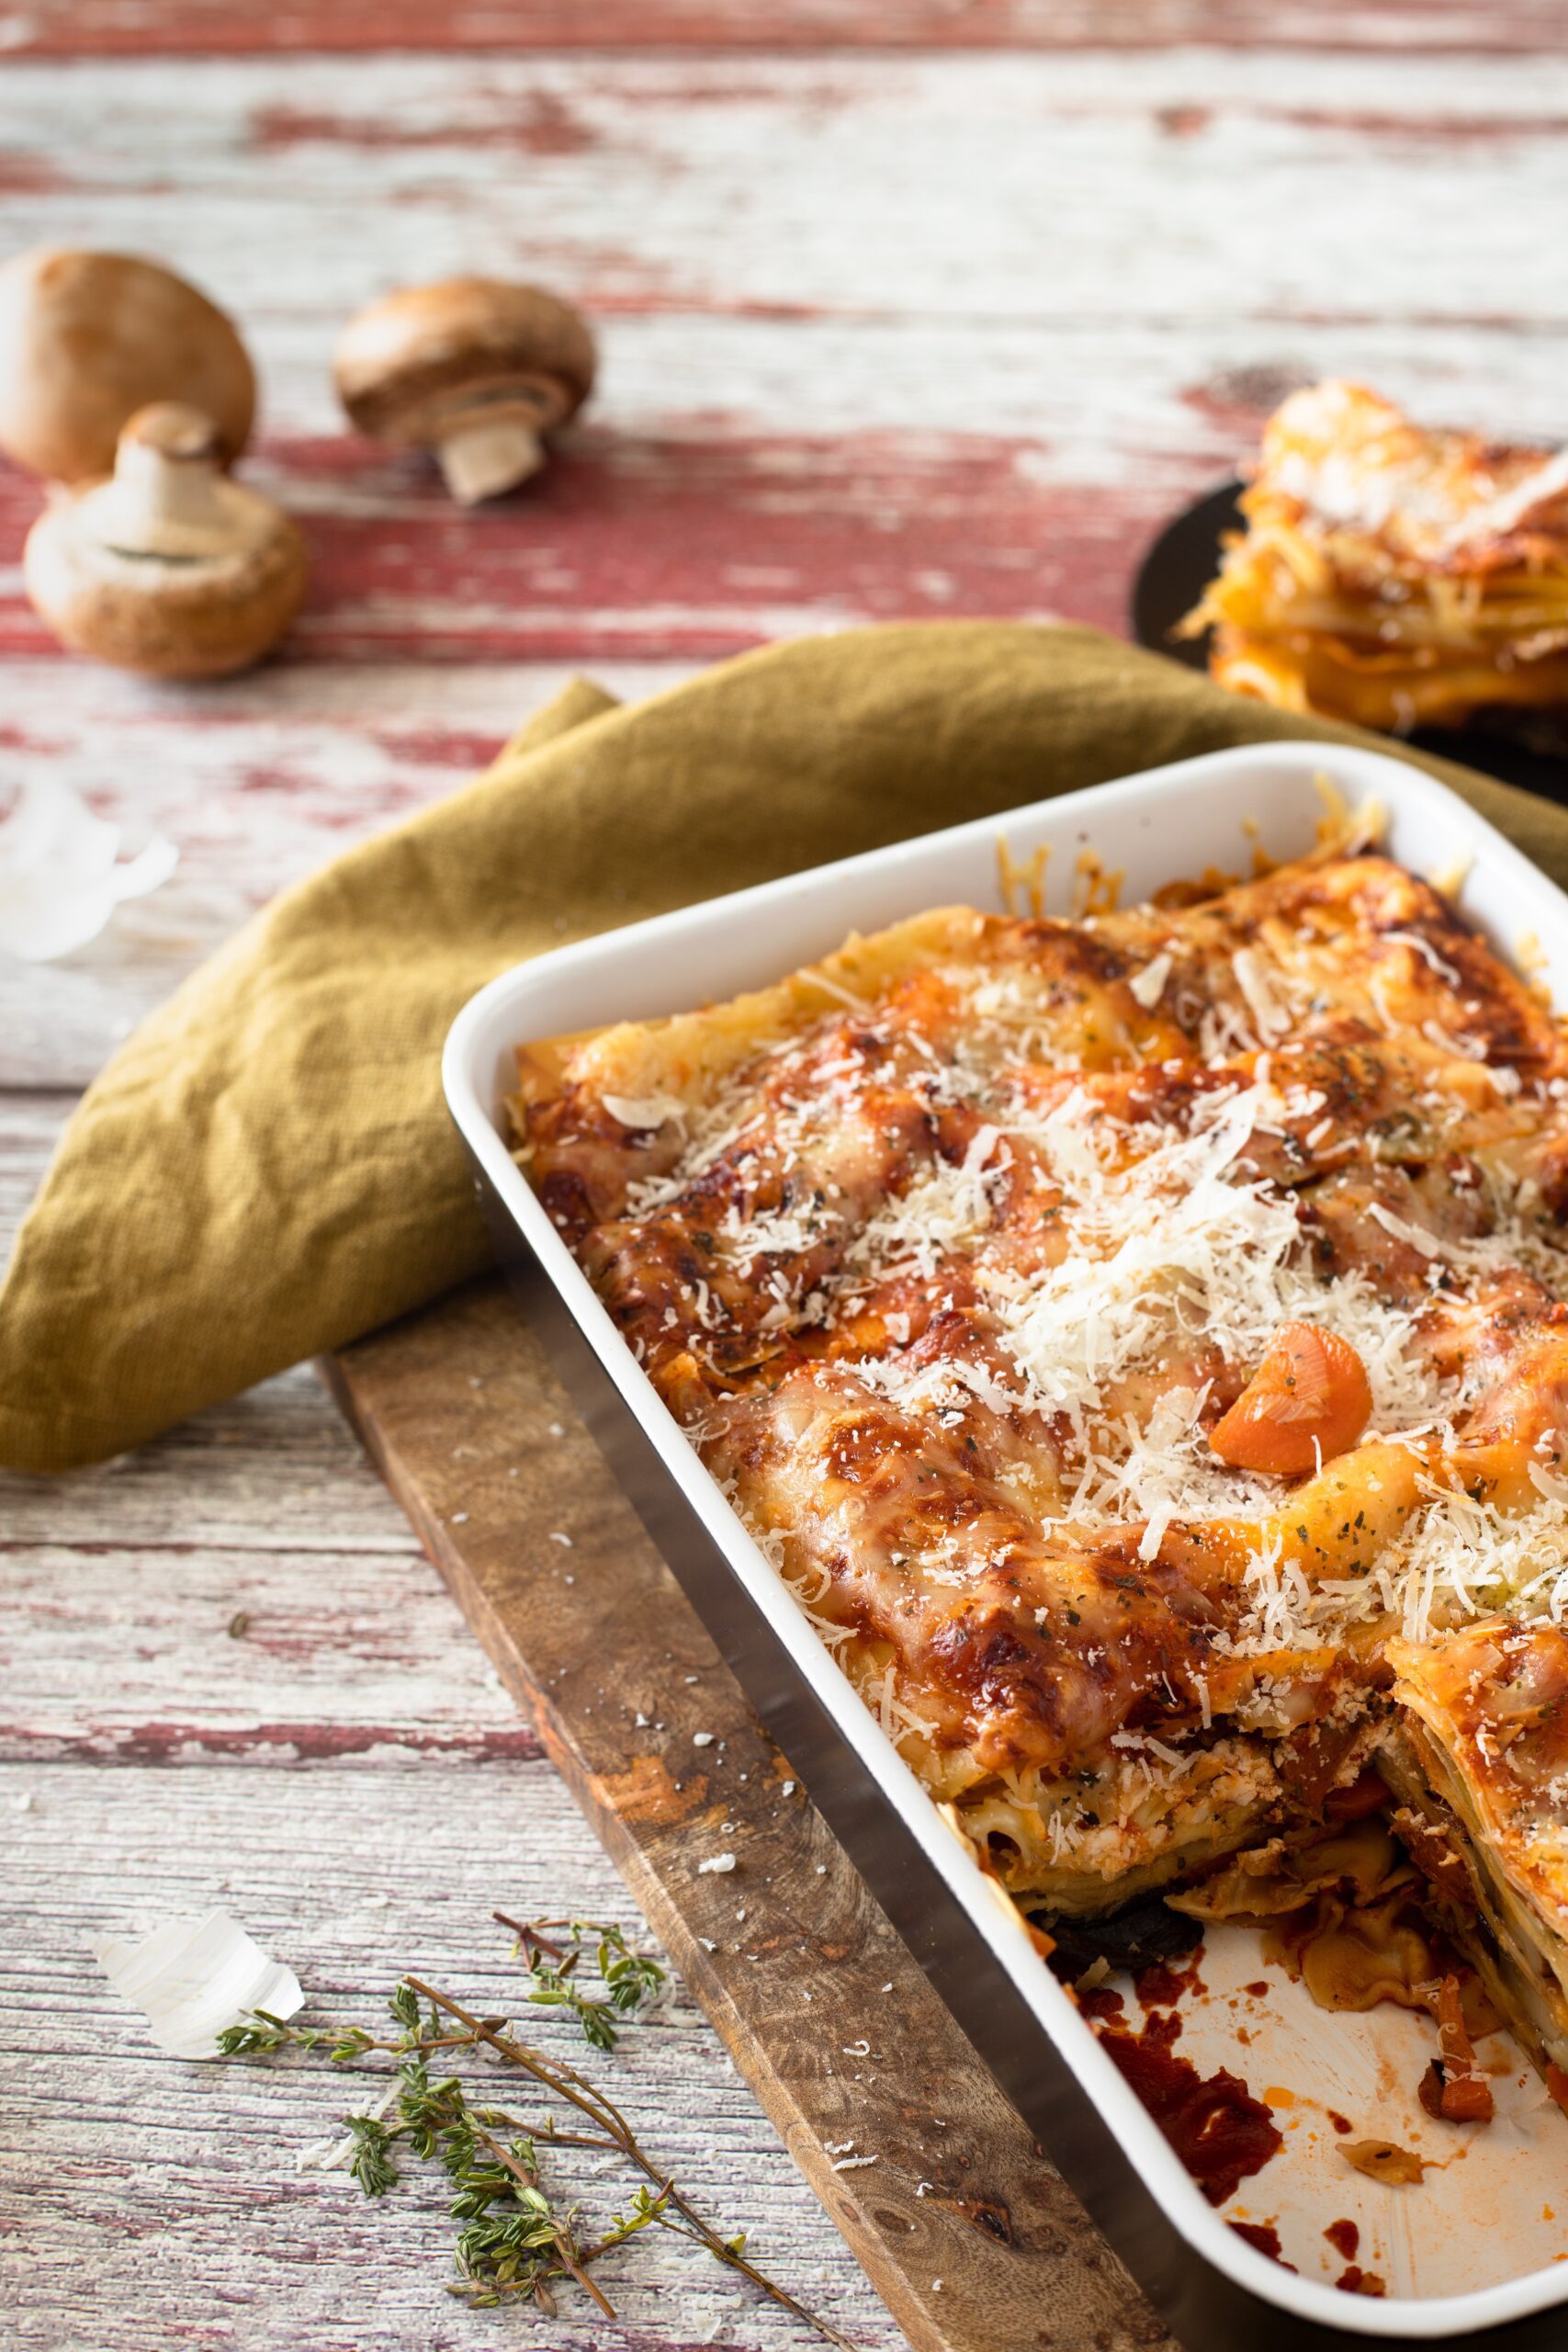 Can You Recommend A Comforting Italian Pasta Dish For A Relaxing Evening?